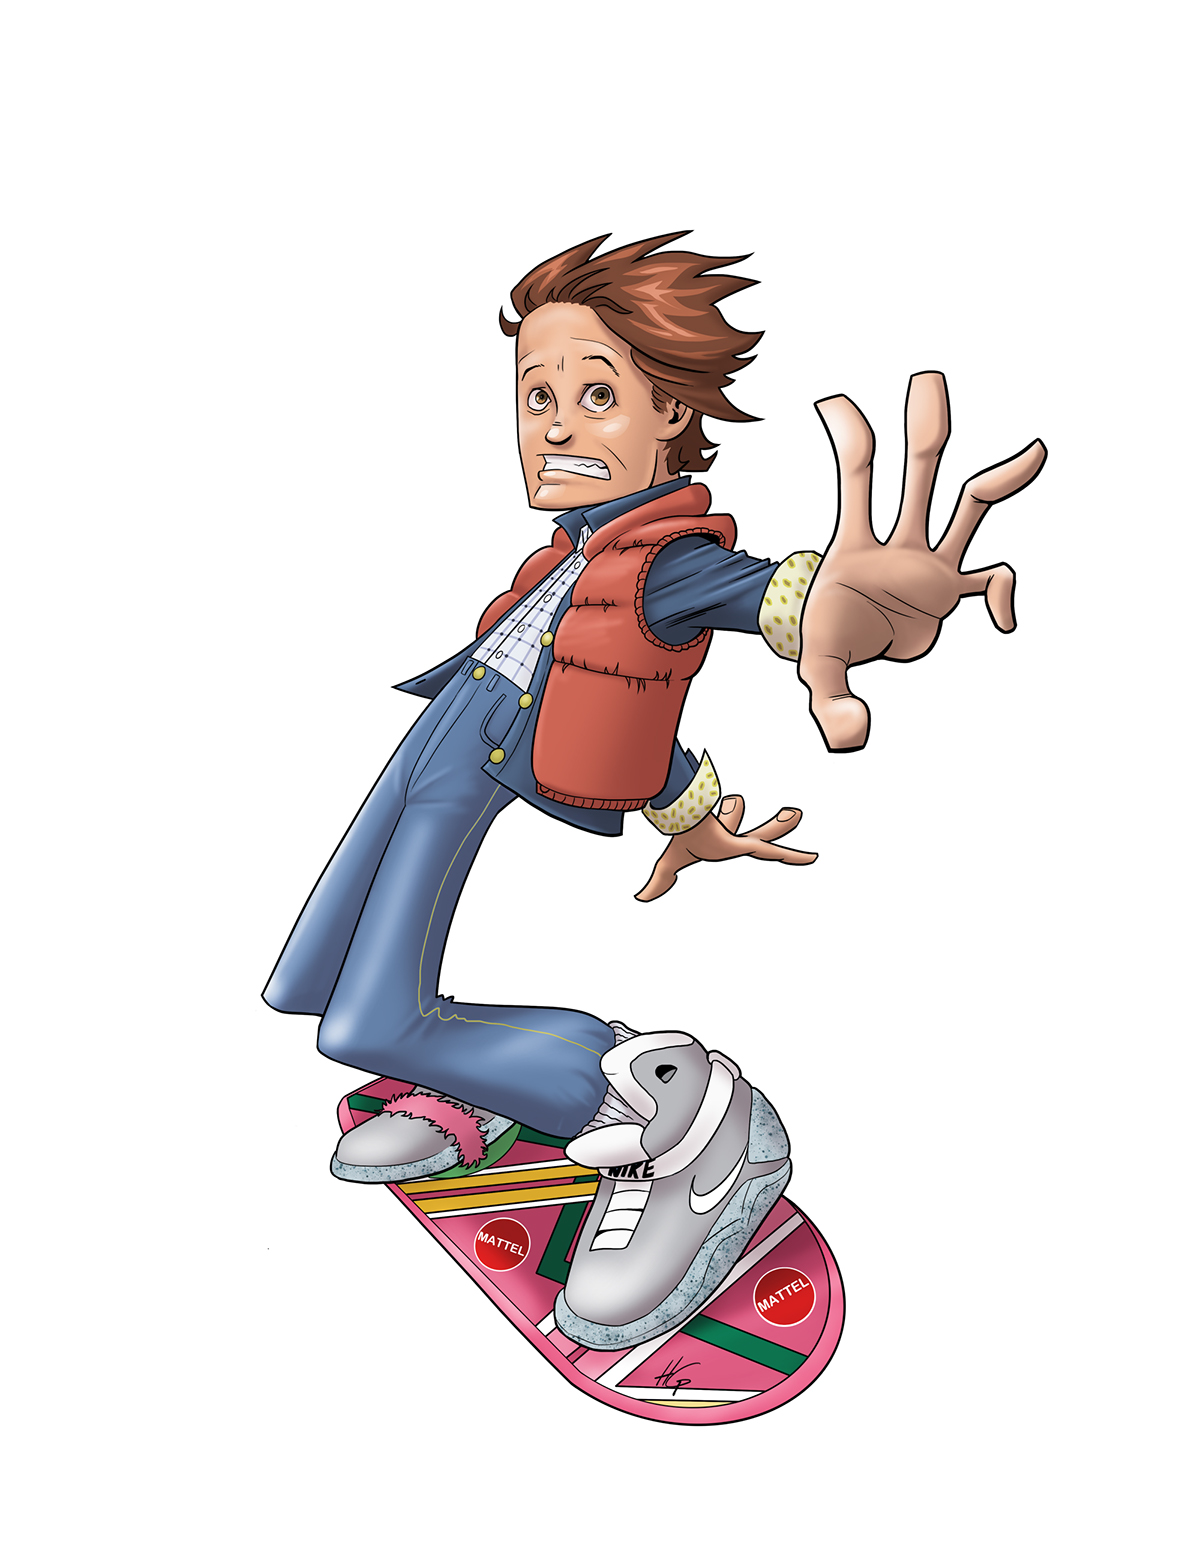 backtothefuture Marty Mcfly Michael J Fox caricature   hoverboard